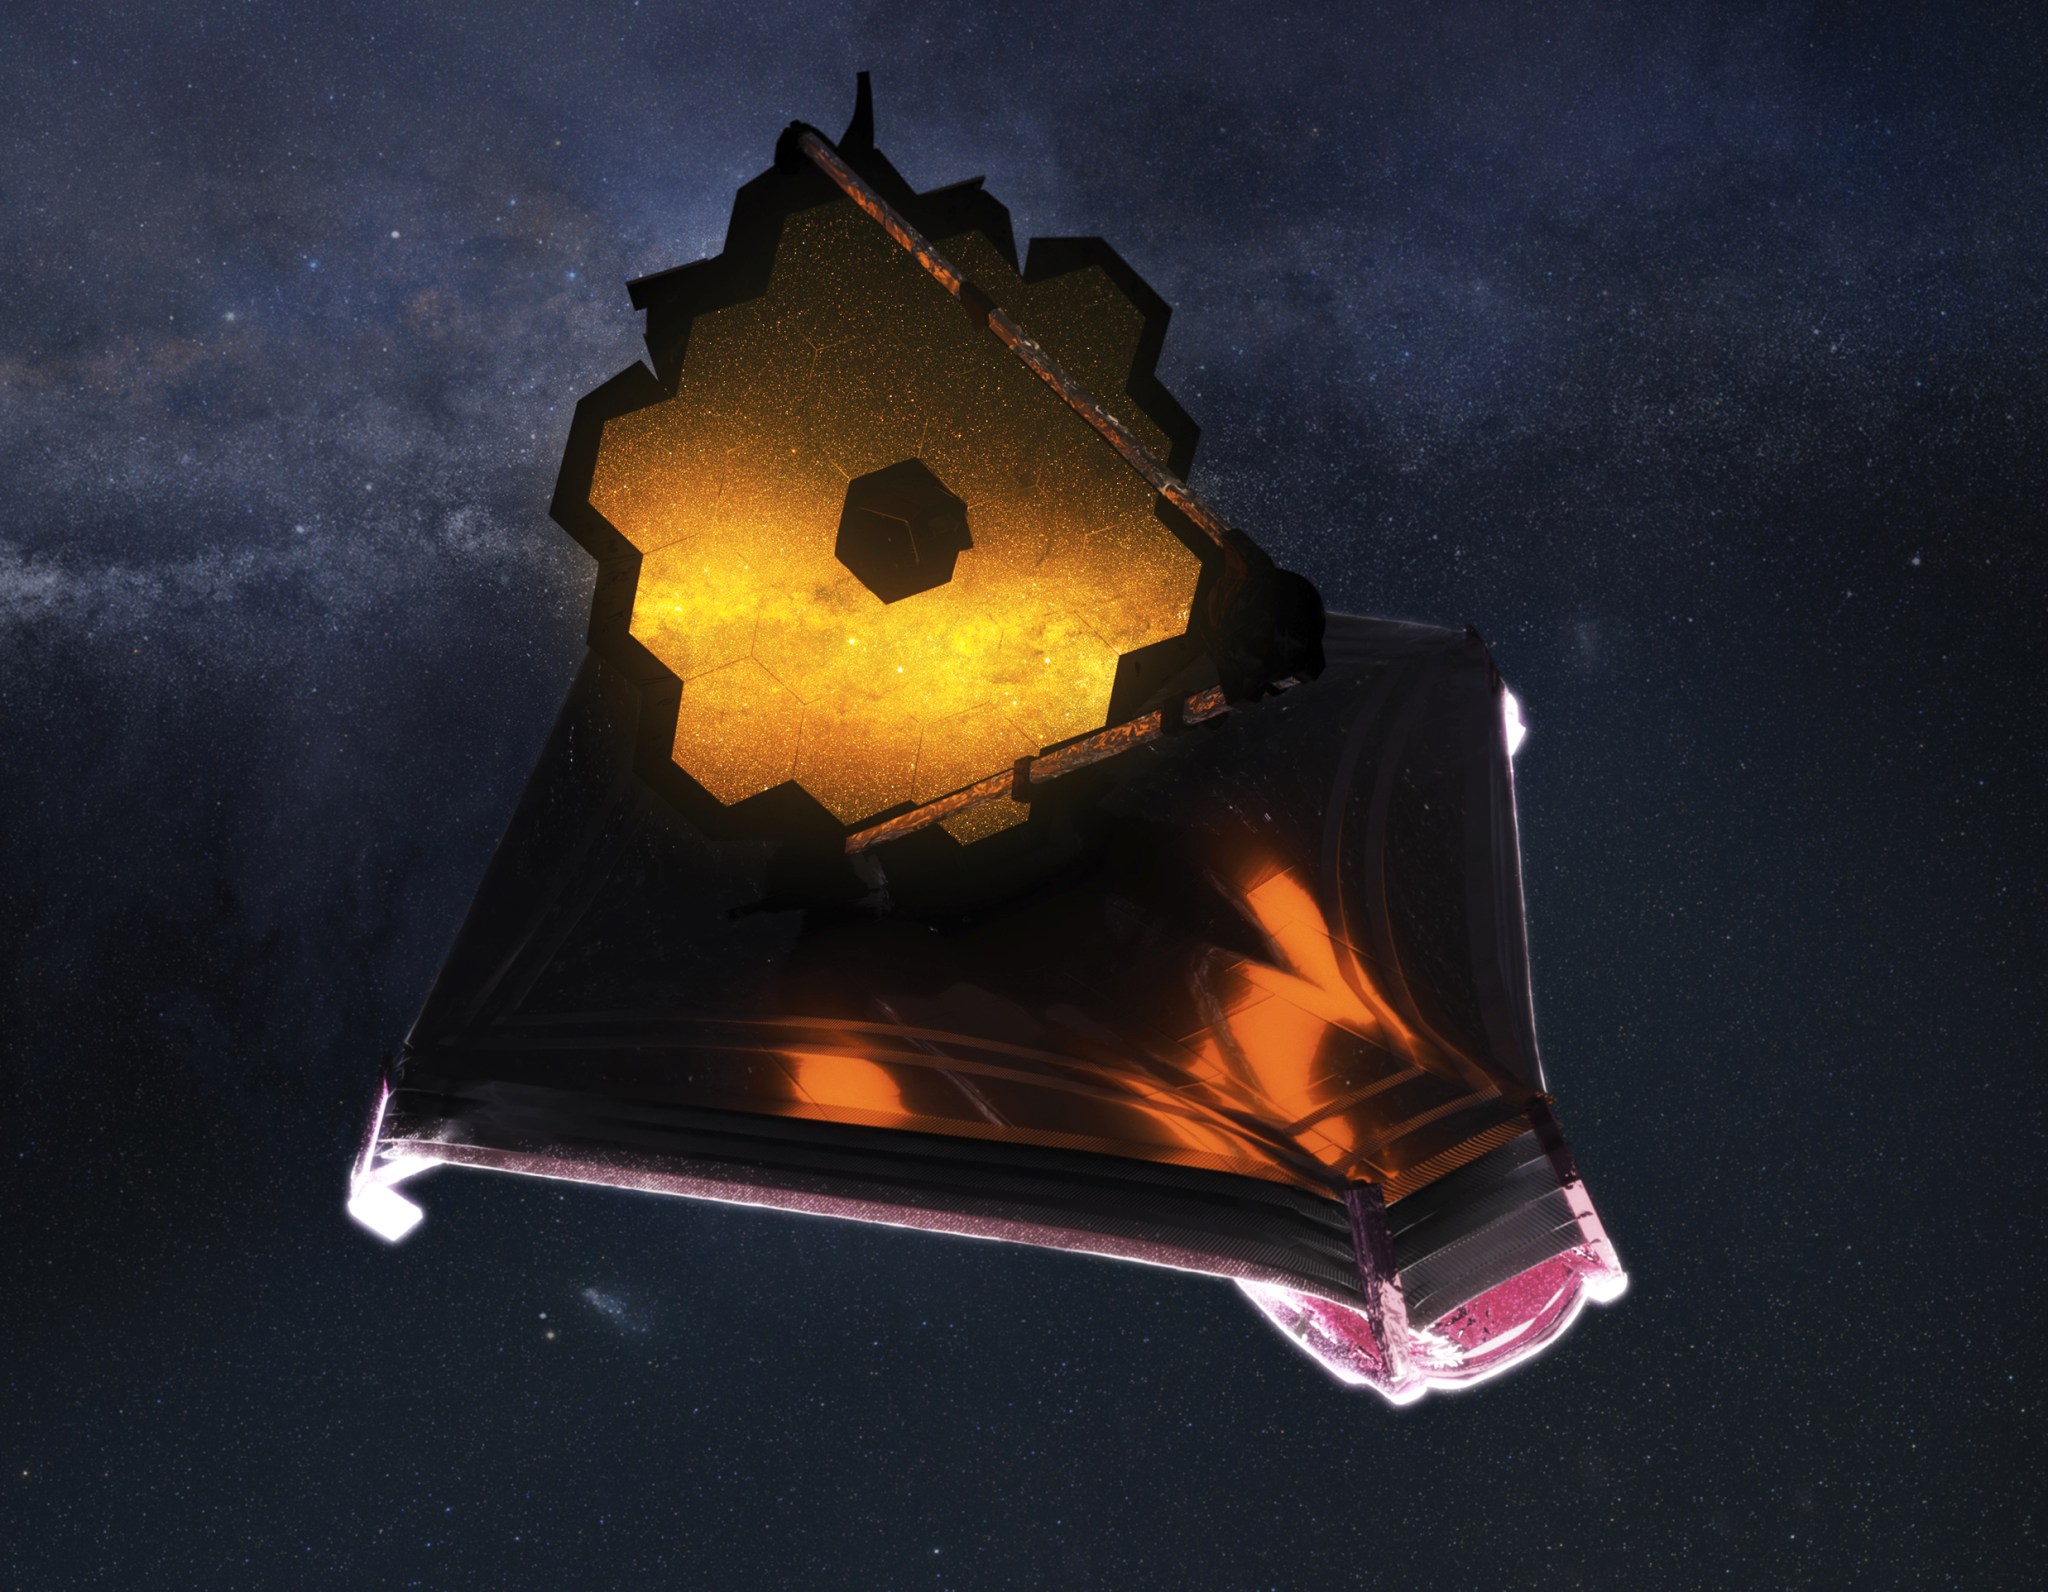 This illustration depicts NASA’s James Webb Space Telescope – the largest, most powerful, and most complex space science telescope ever built – fully unfolded in space.